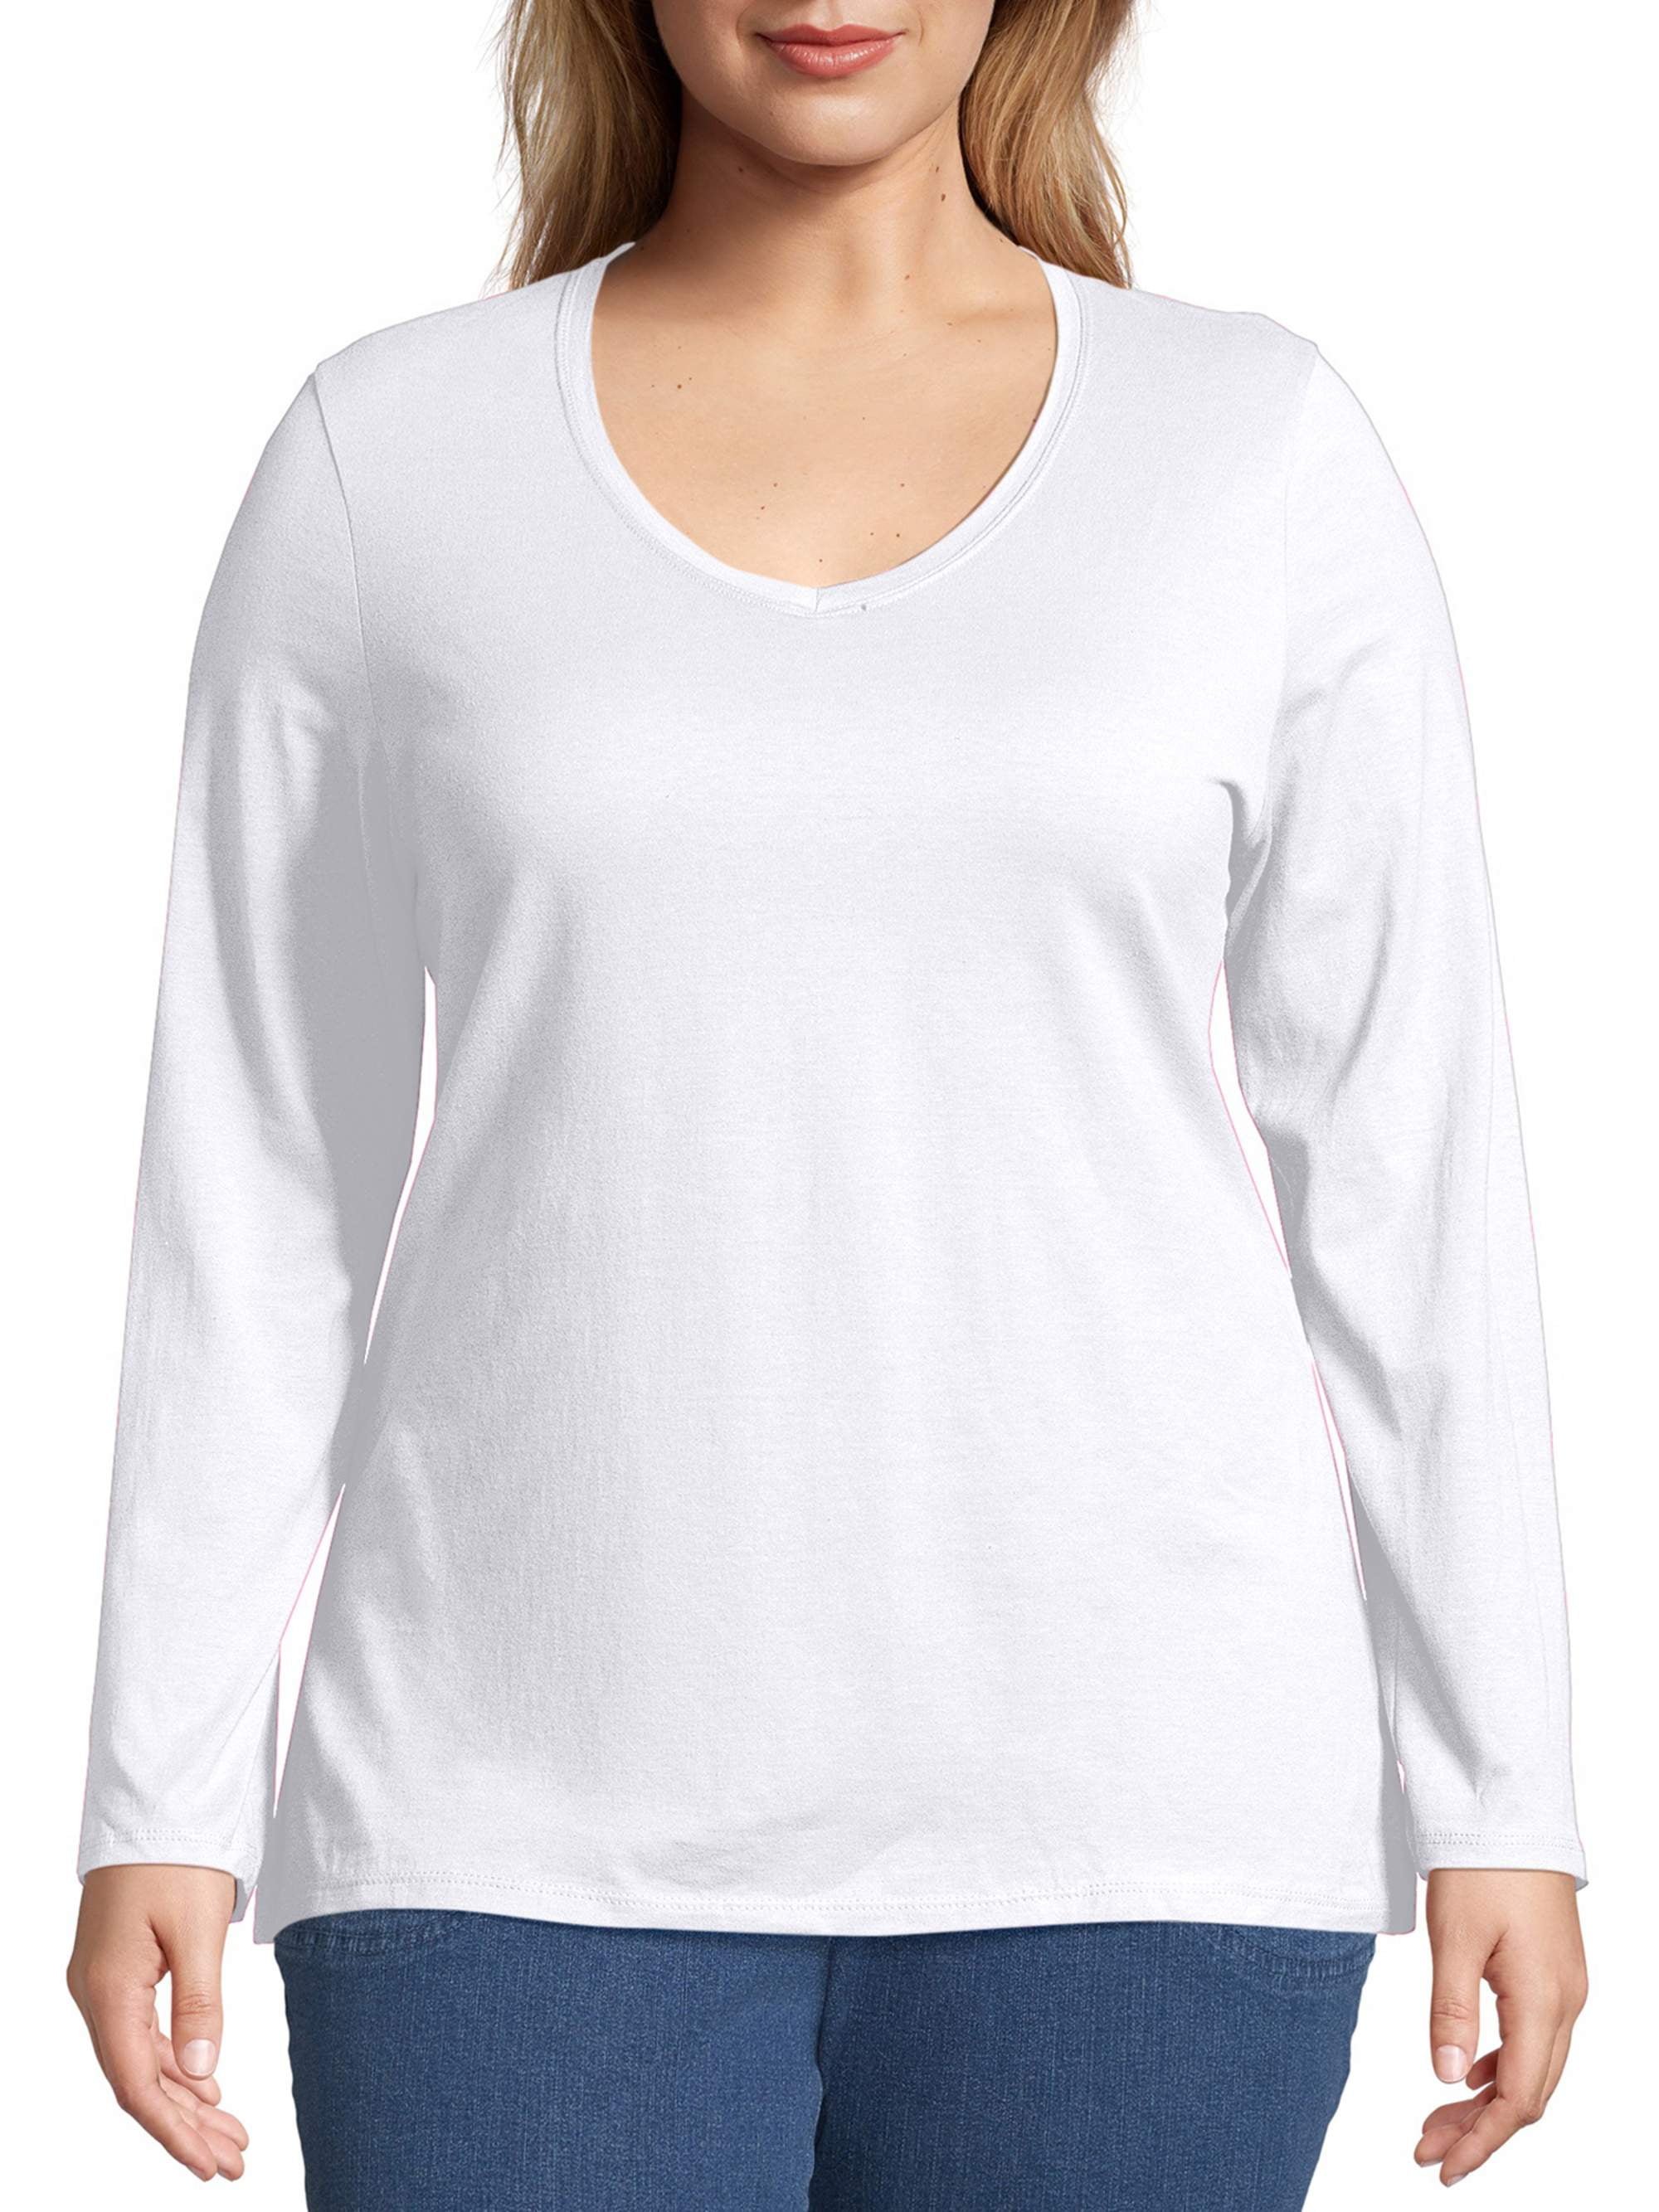 JUST MY SIZE Womens Plus Size Long Sleeve Graphic V-Neck Tee